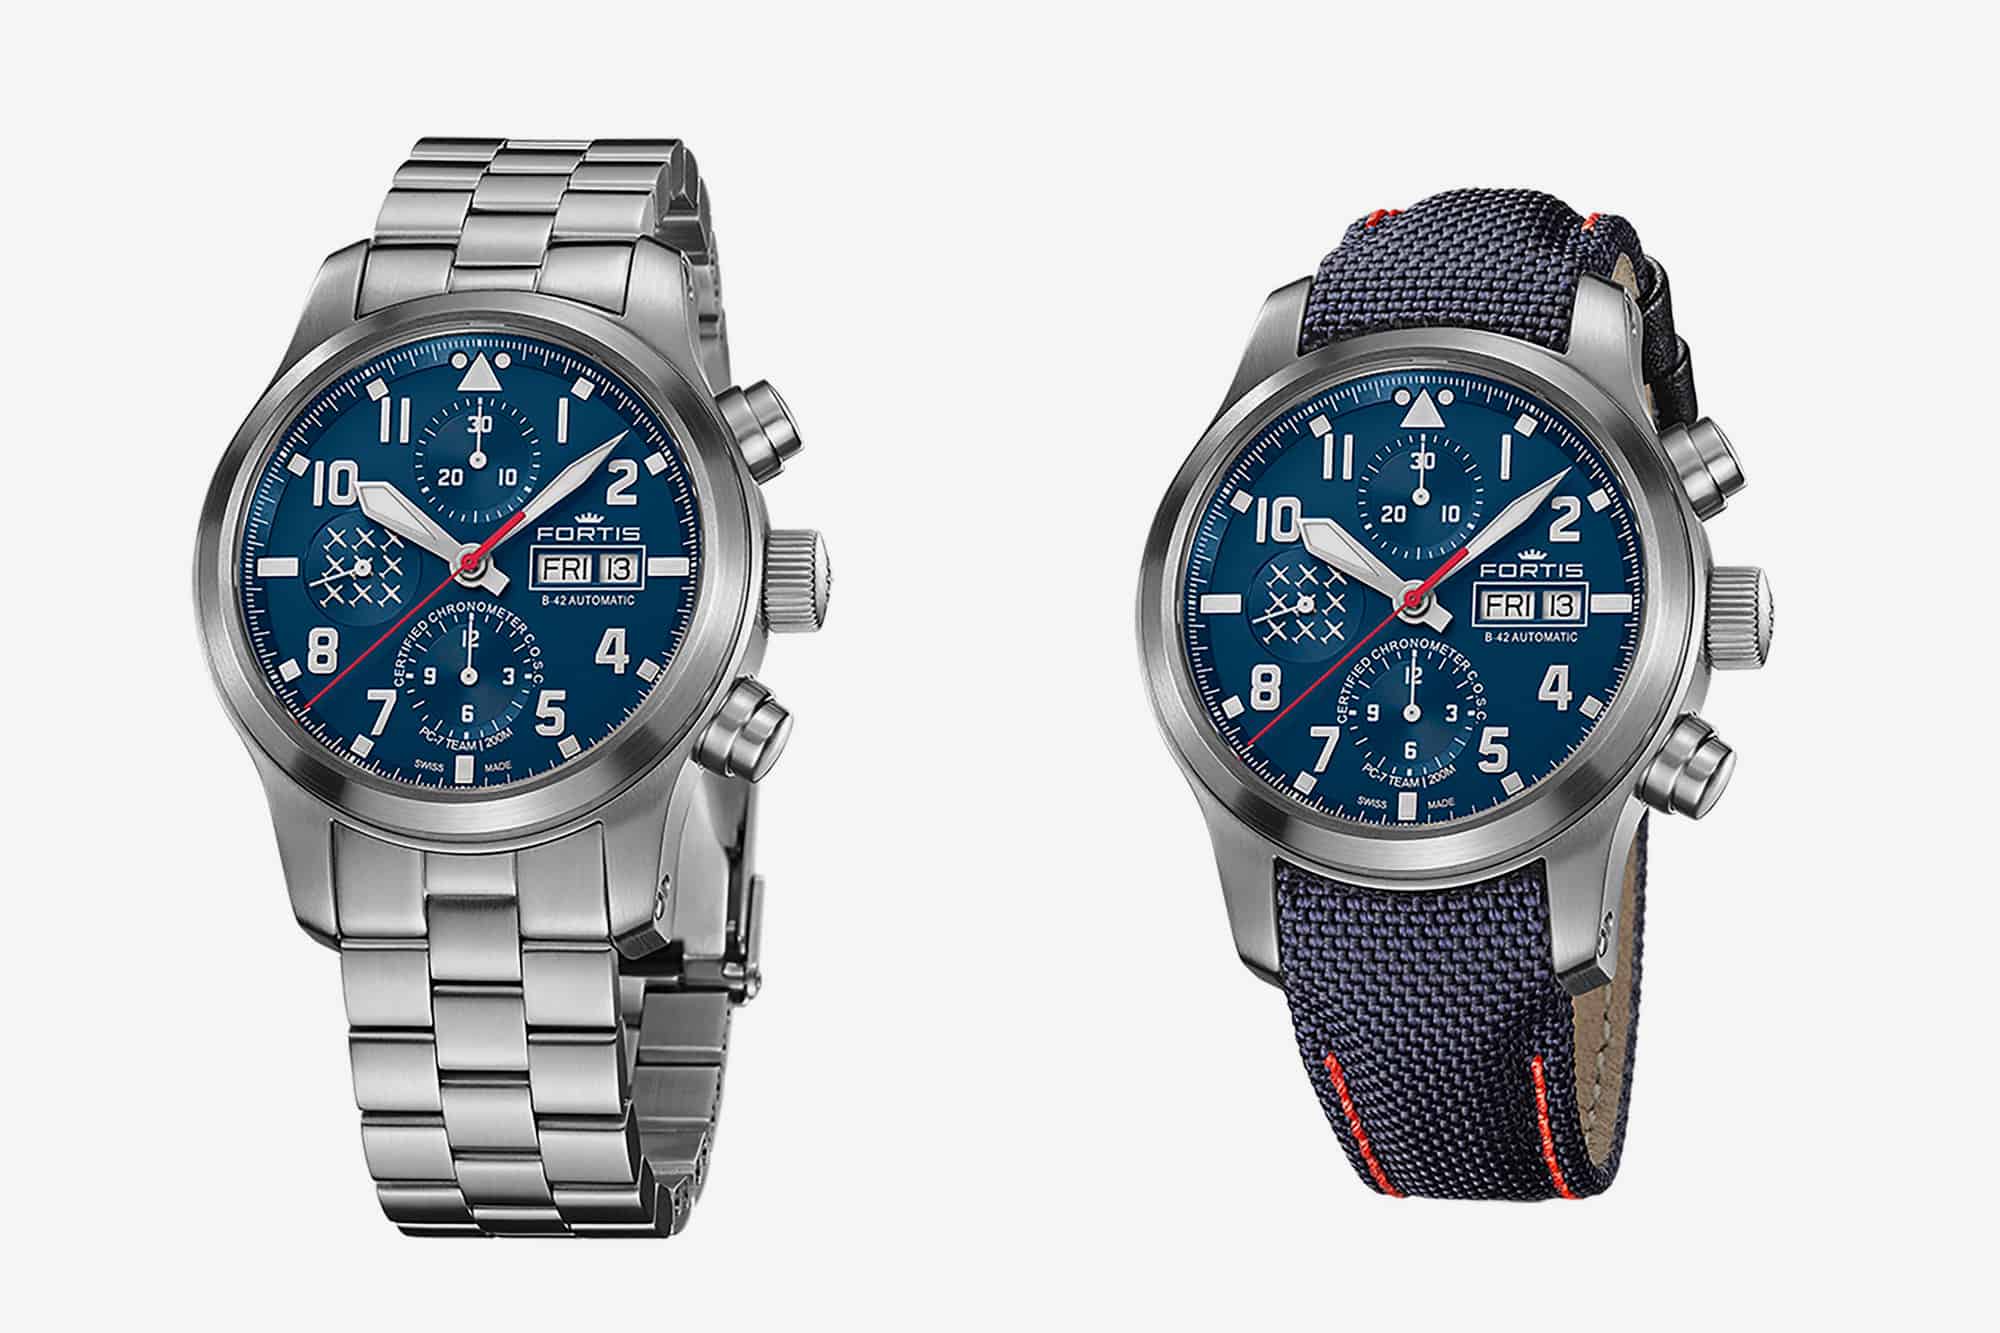 Introducing the Fortis PC-7 TEAM Aeromaster Chronograph and Day-Date 